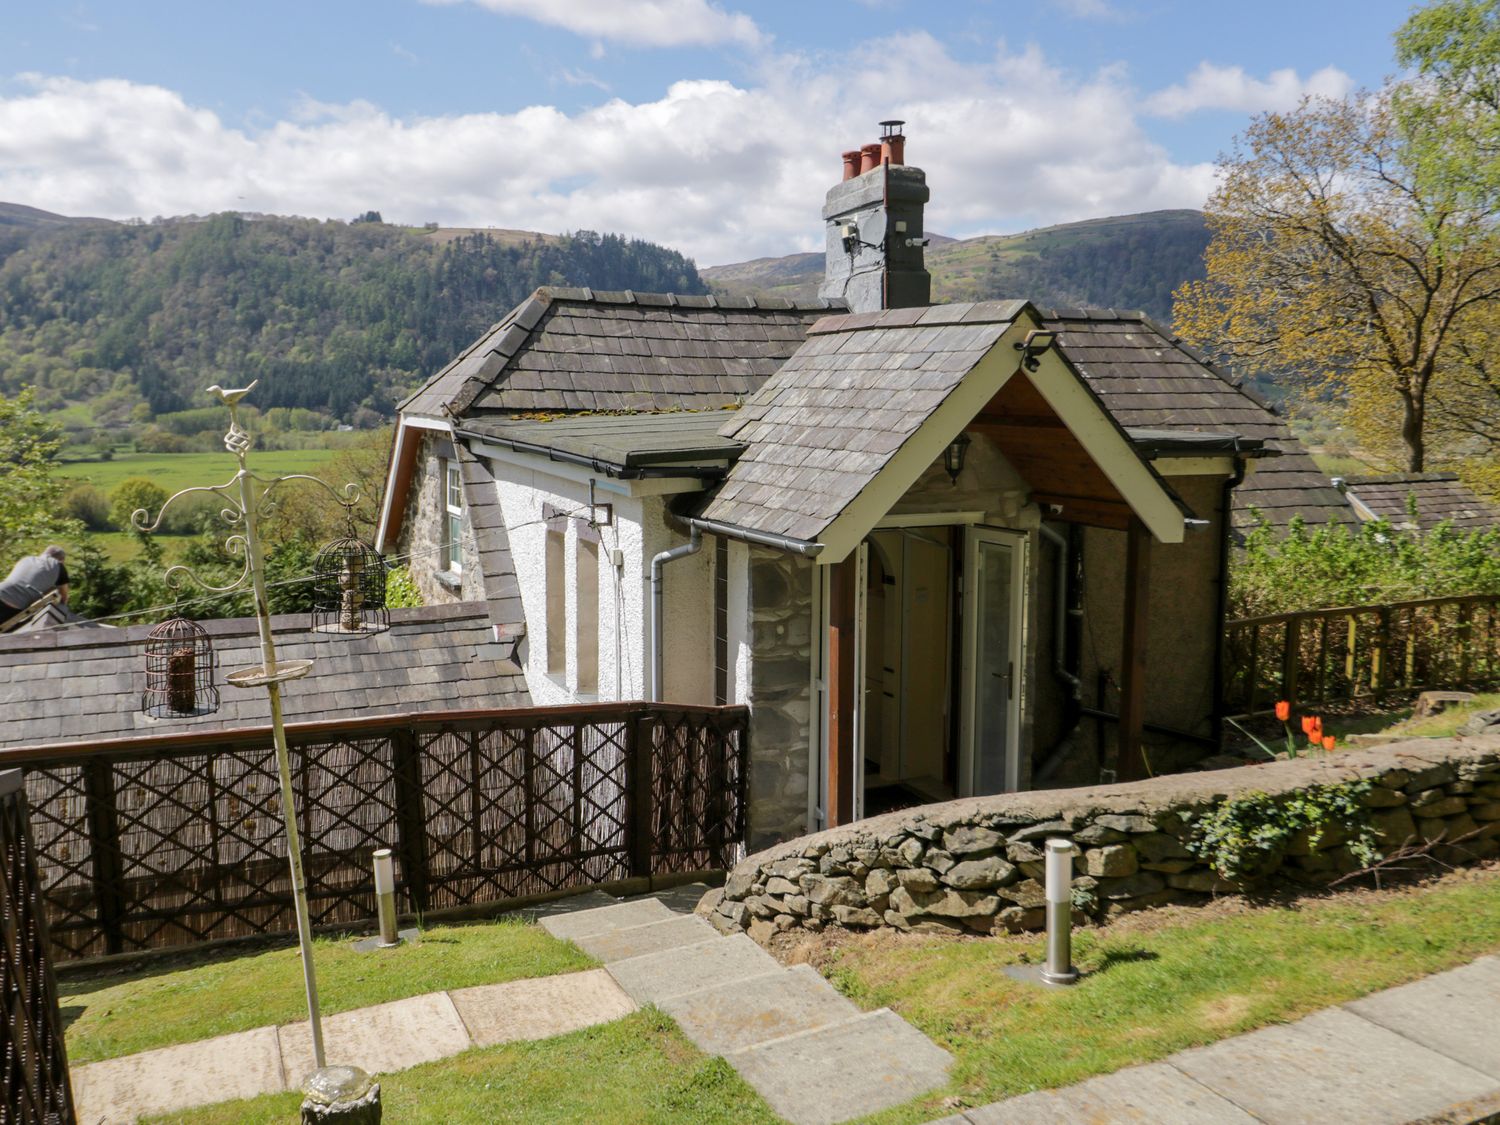 The Nook, Snowdonia National Park